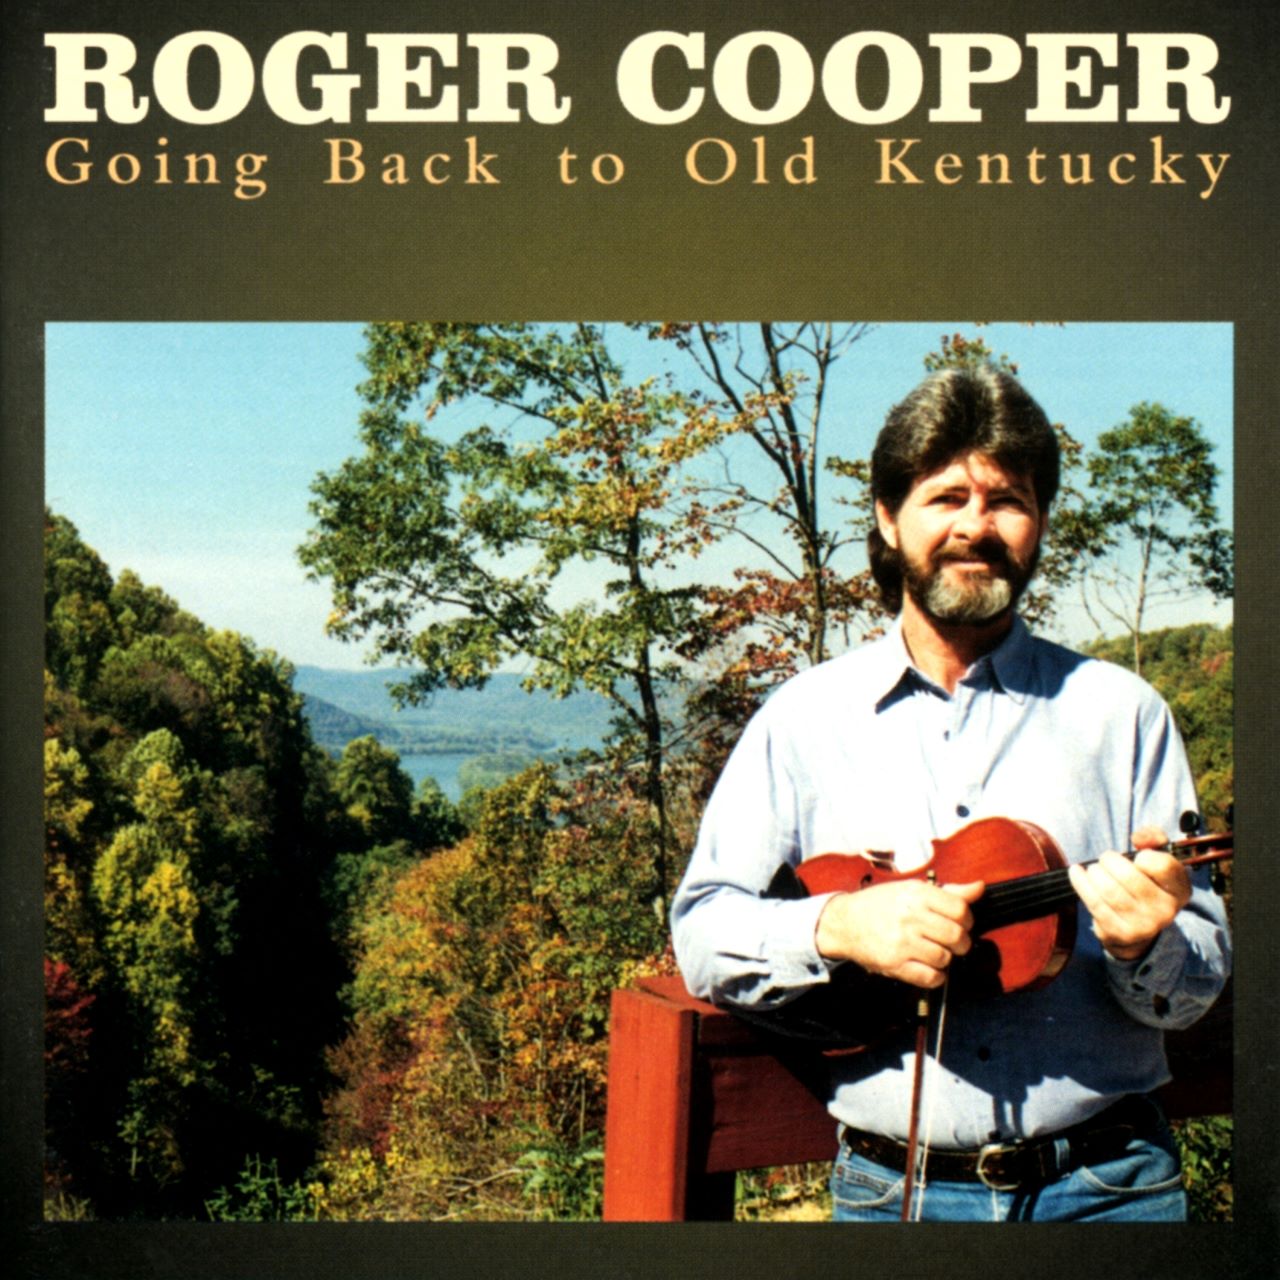 Roger Cooper - Going Back To Old Kentucky cover album